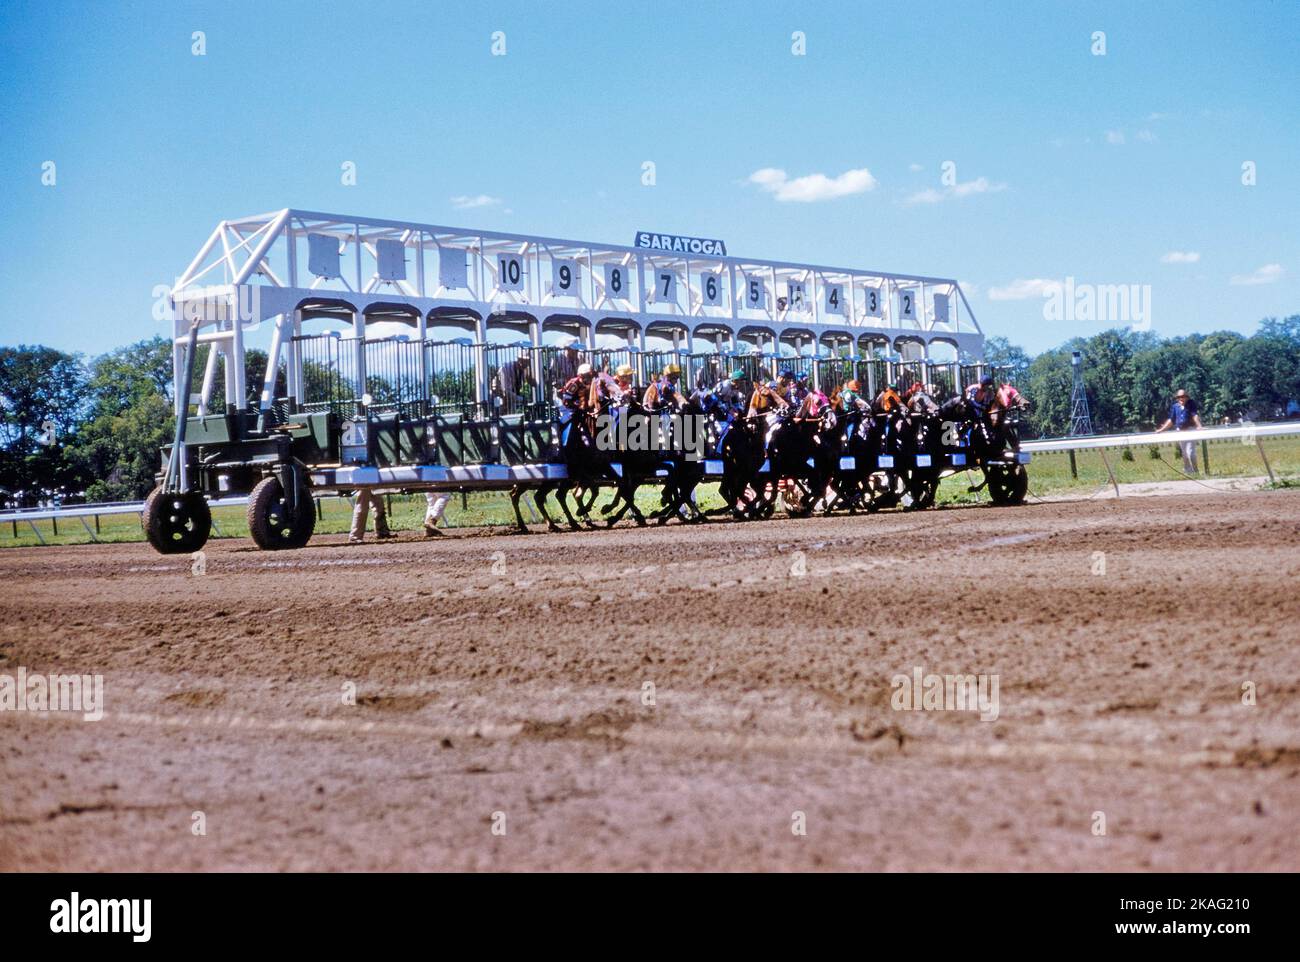 Start of Horse Race, Saratoga Springs, New York, USA, Toni Frissell Collection, August 1960 Stock Photo